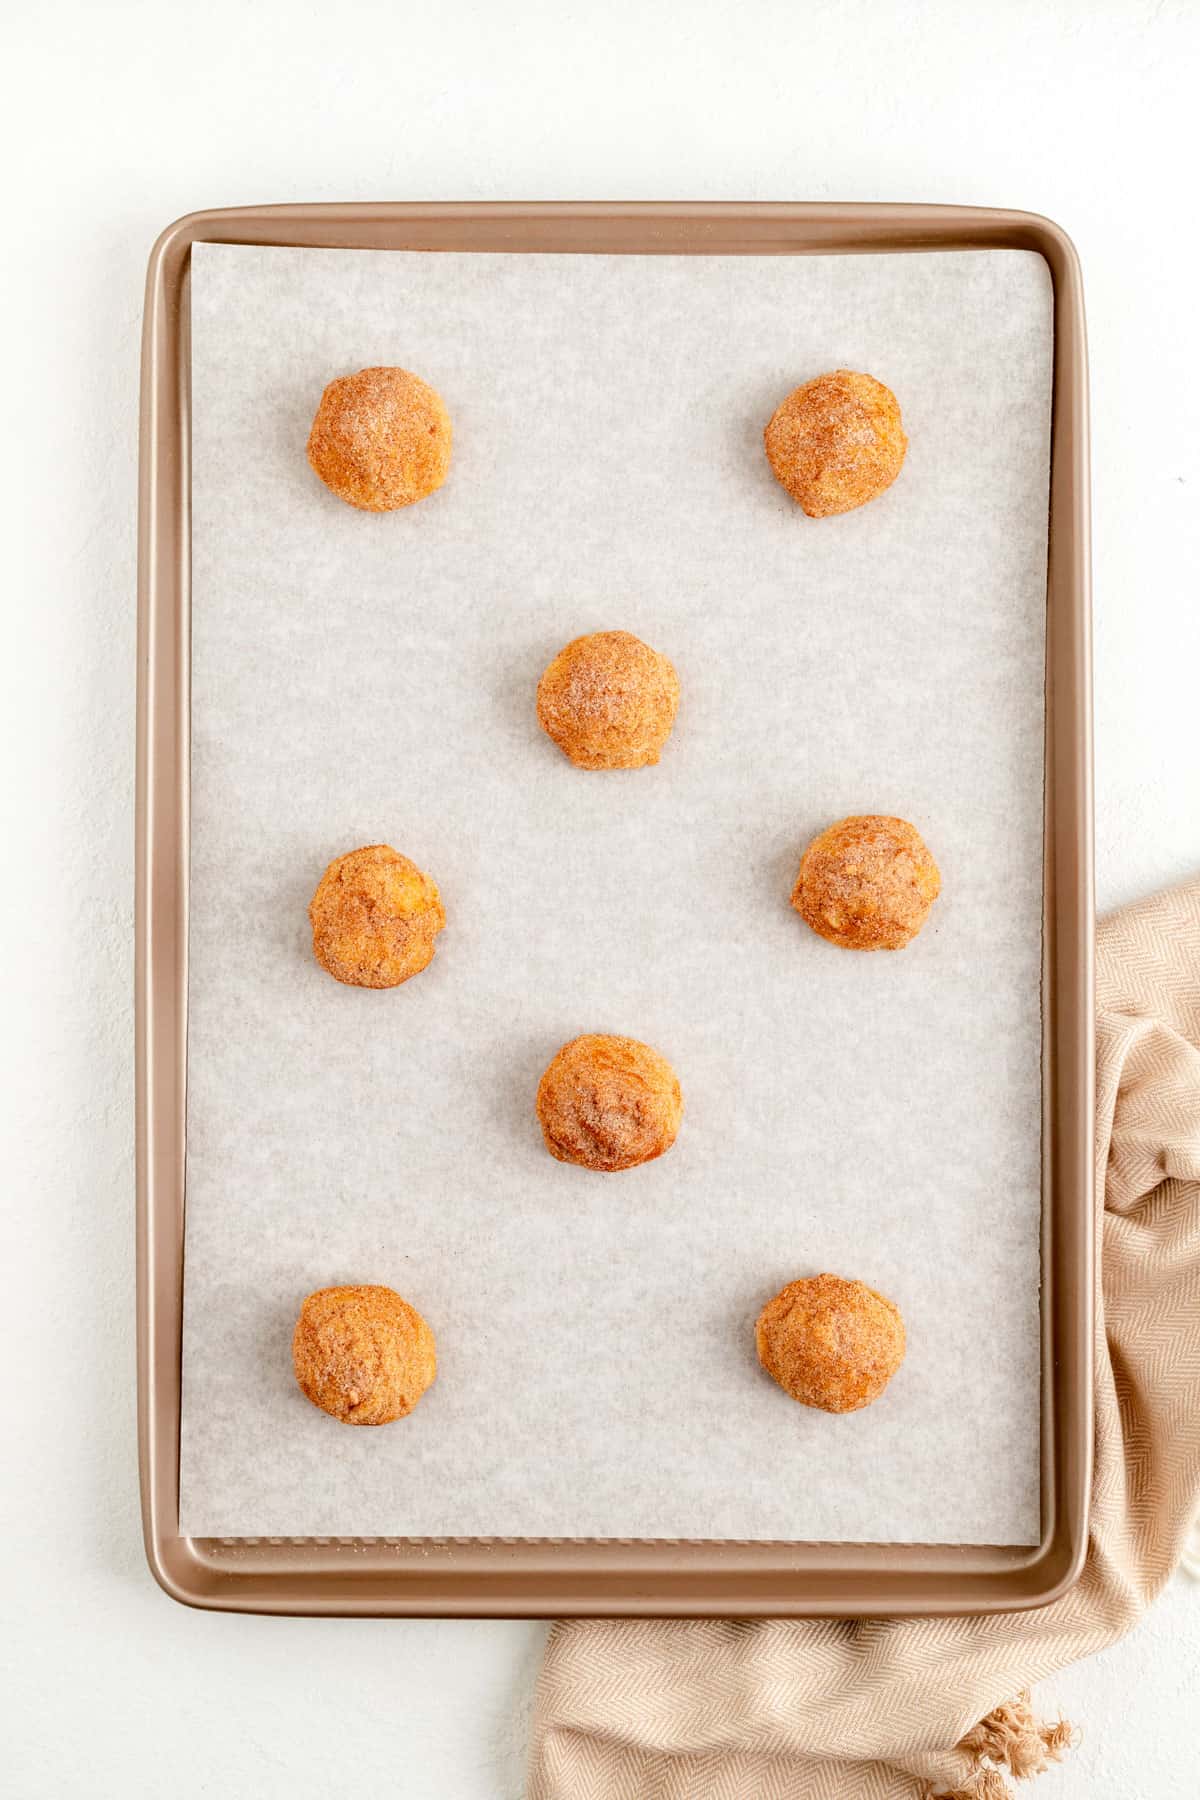 snickerdoodle dough balls spaced out on a parchment lined gold baking sheet.